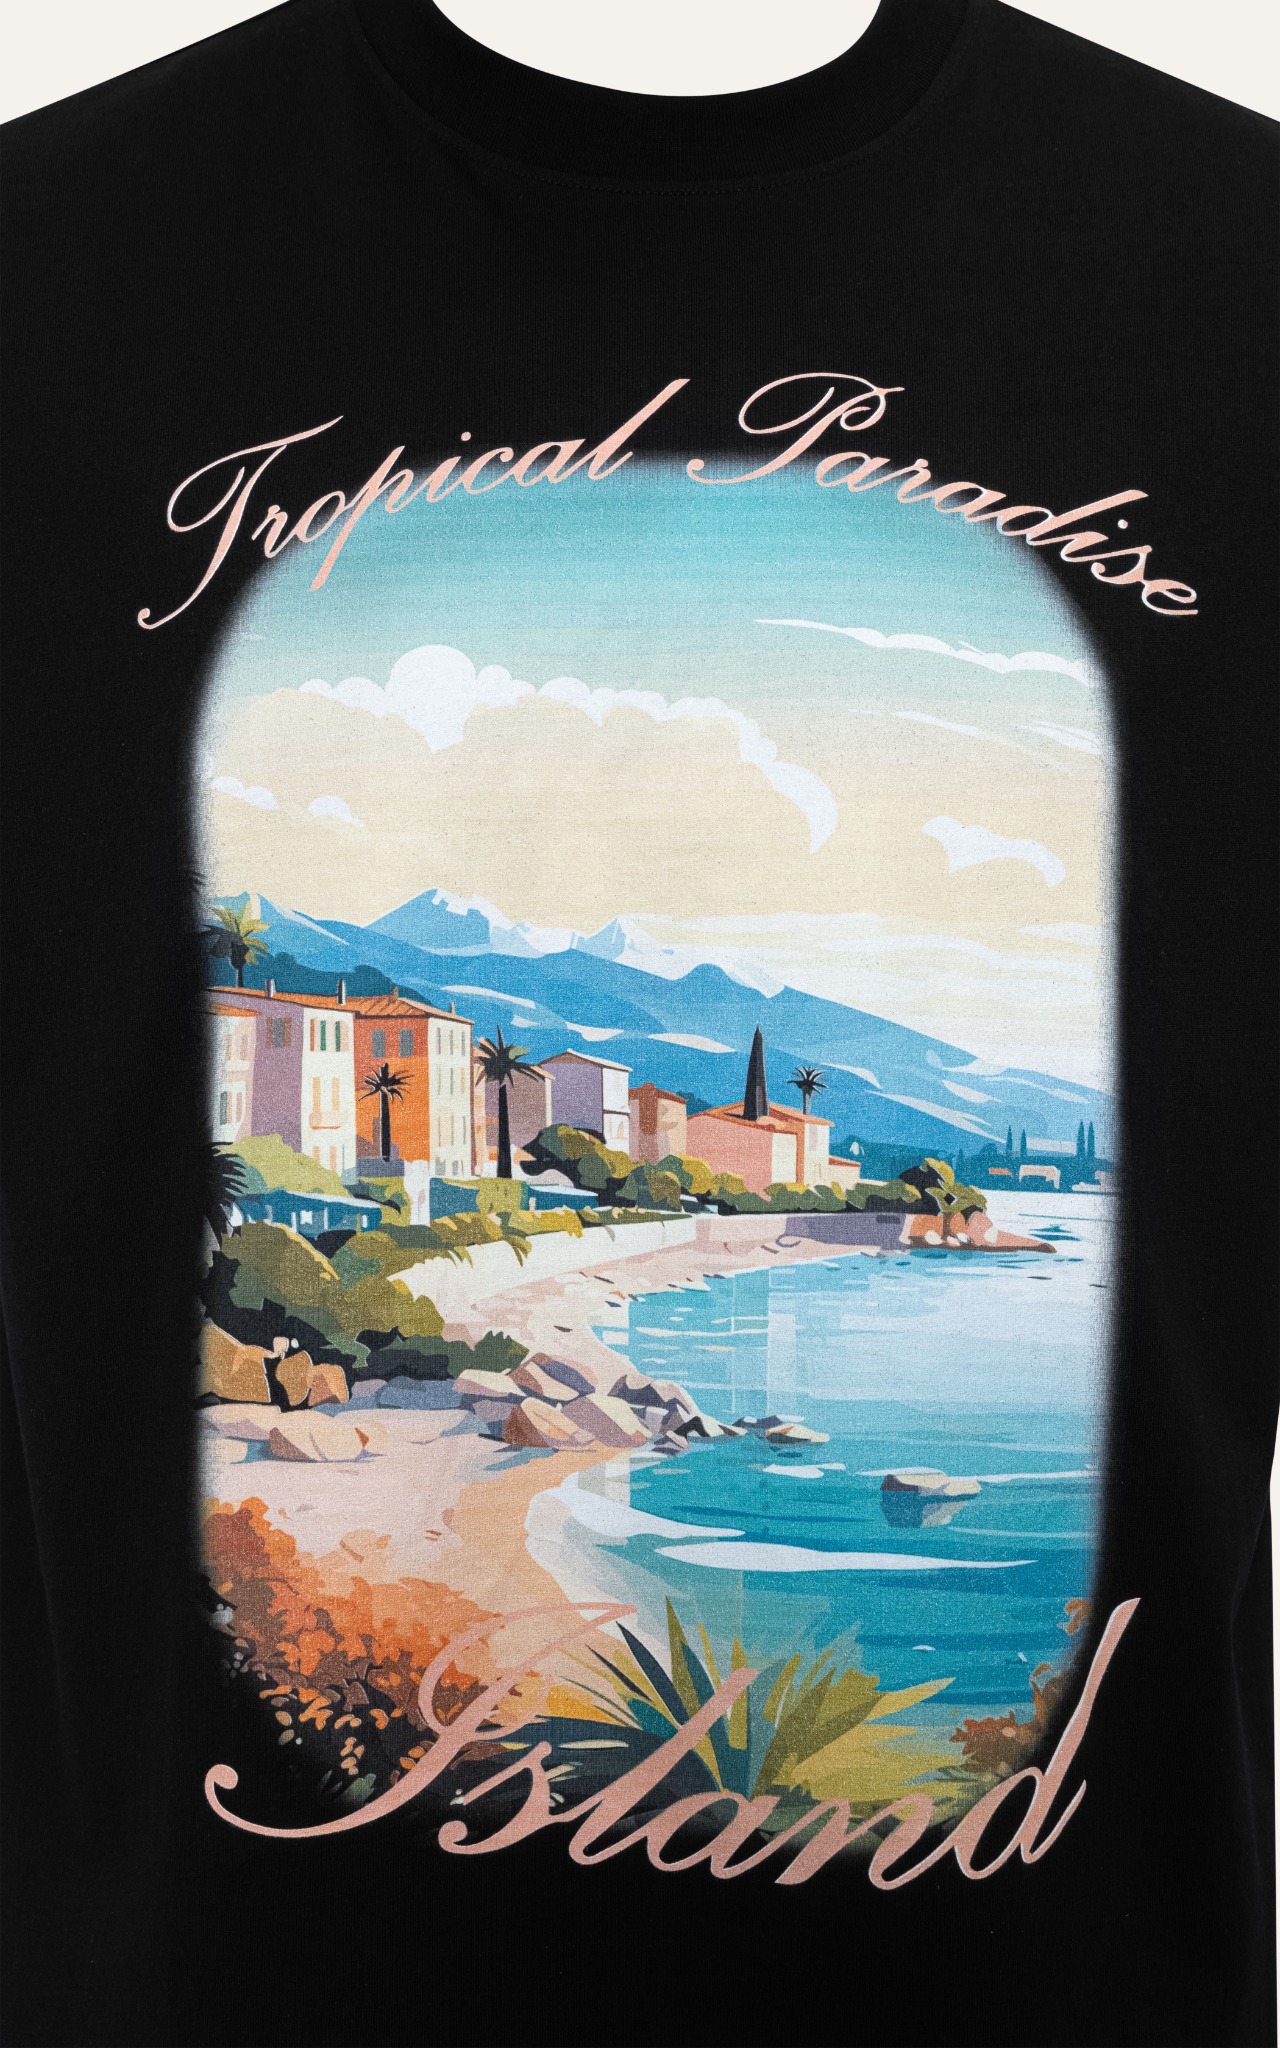 AG695 FACTORY OVERSIZE NEW PRINTED "TROPICAL PARADISE" T-SHIRT - BLACK